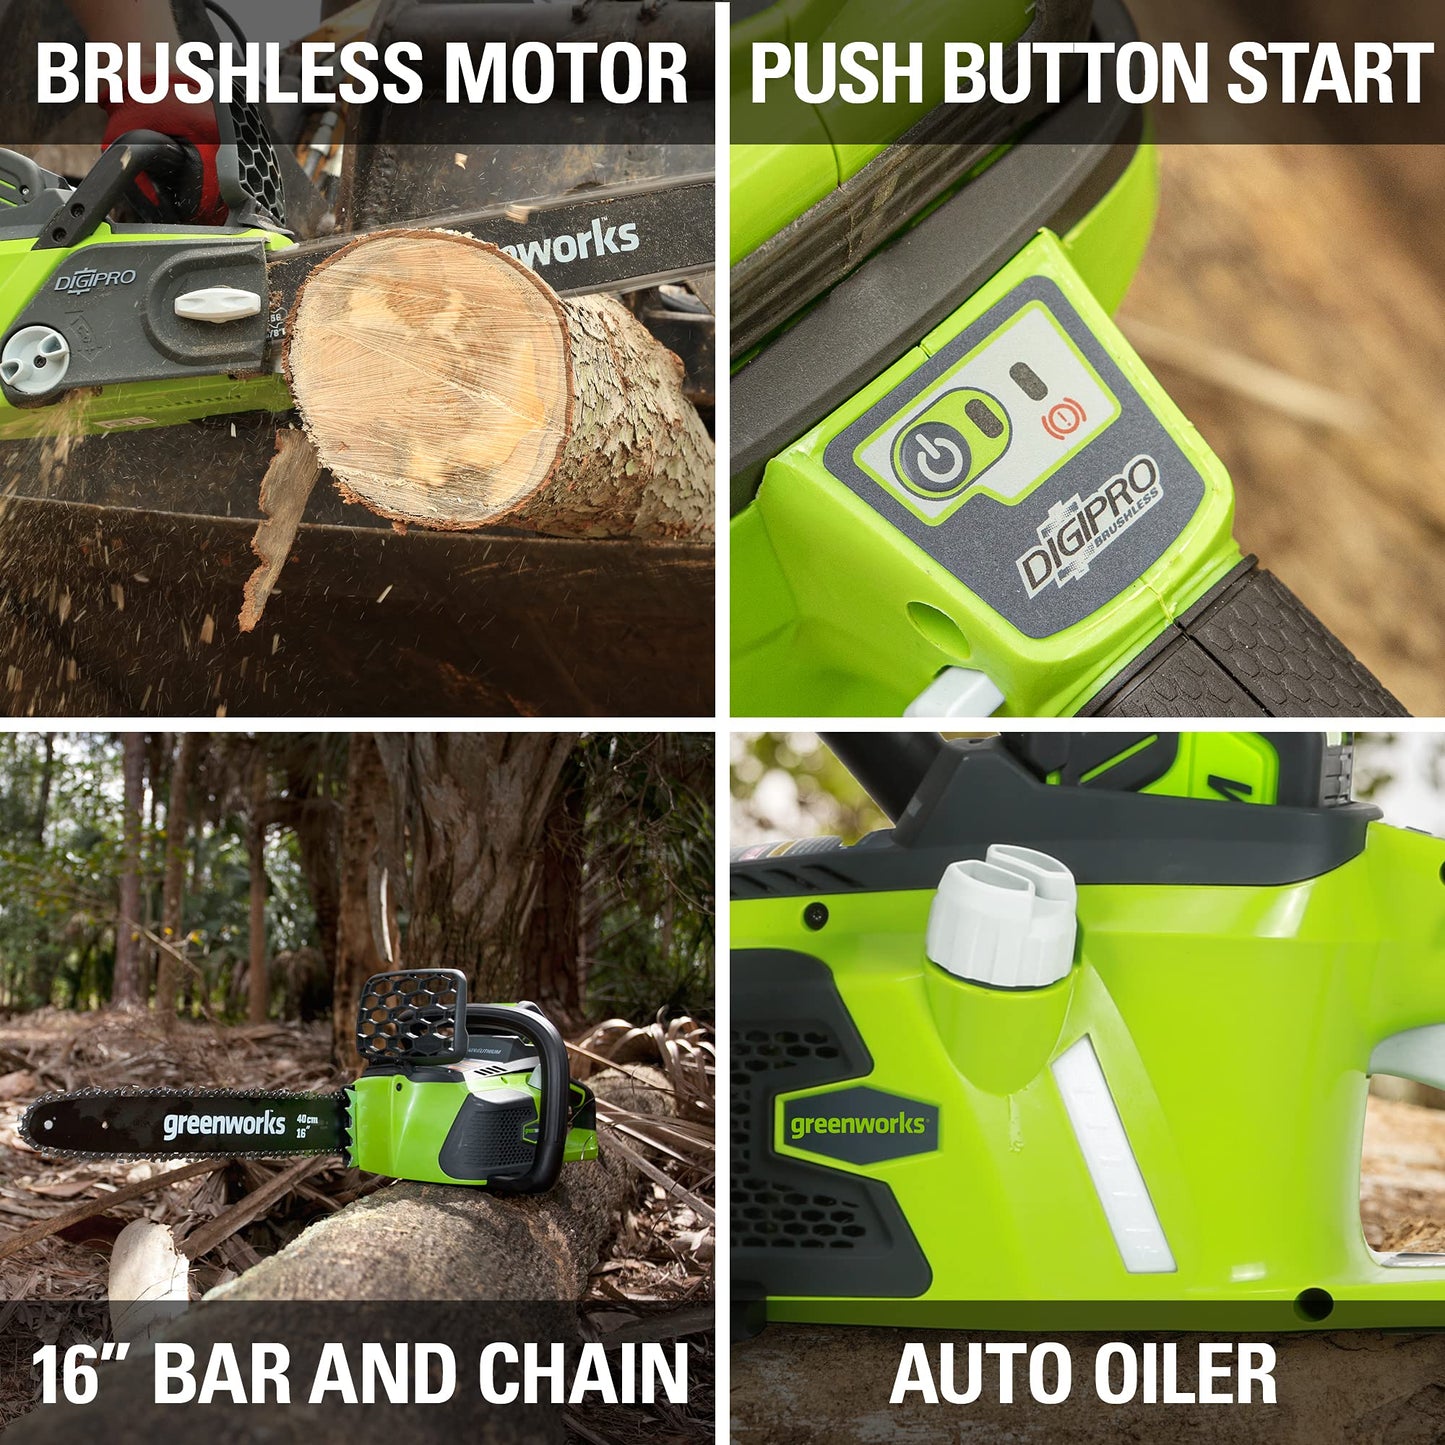 Greenworks 40V 16" Brushless Cordless Chainsaw (Great For Tree Felling, Limbing, Pruning, and Firewood / 75+ Compatible Tools), 4.0Ah Battery and